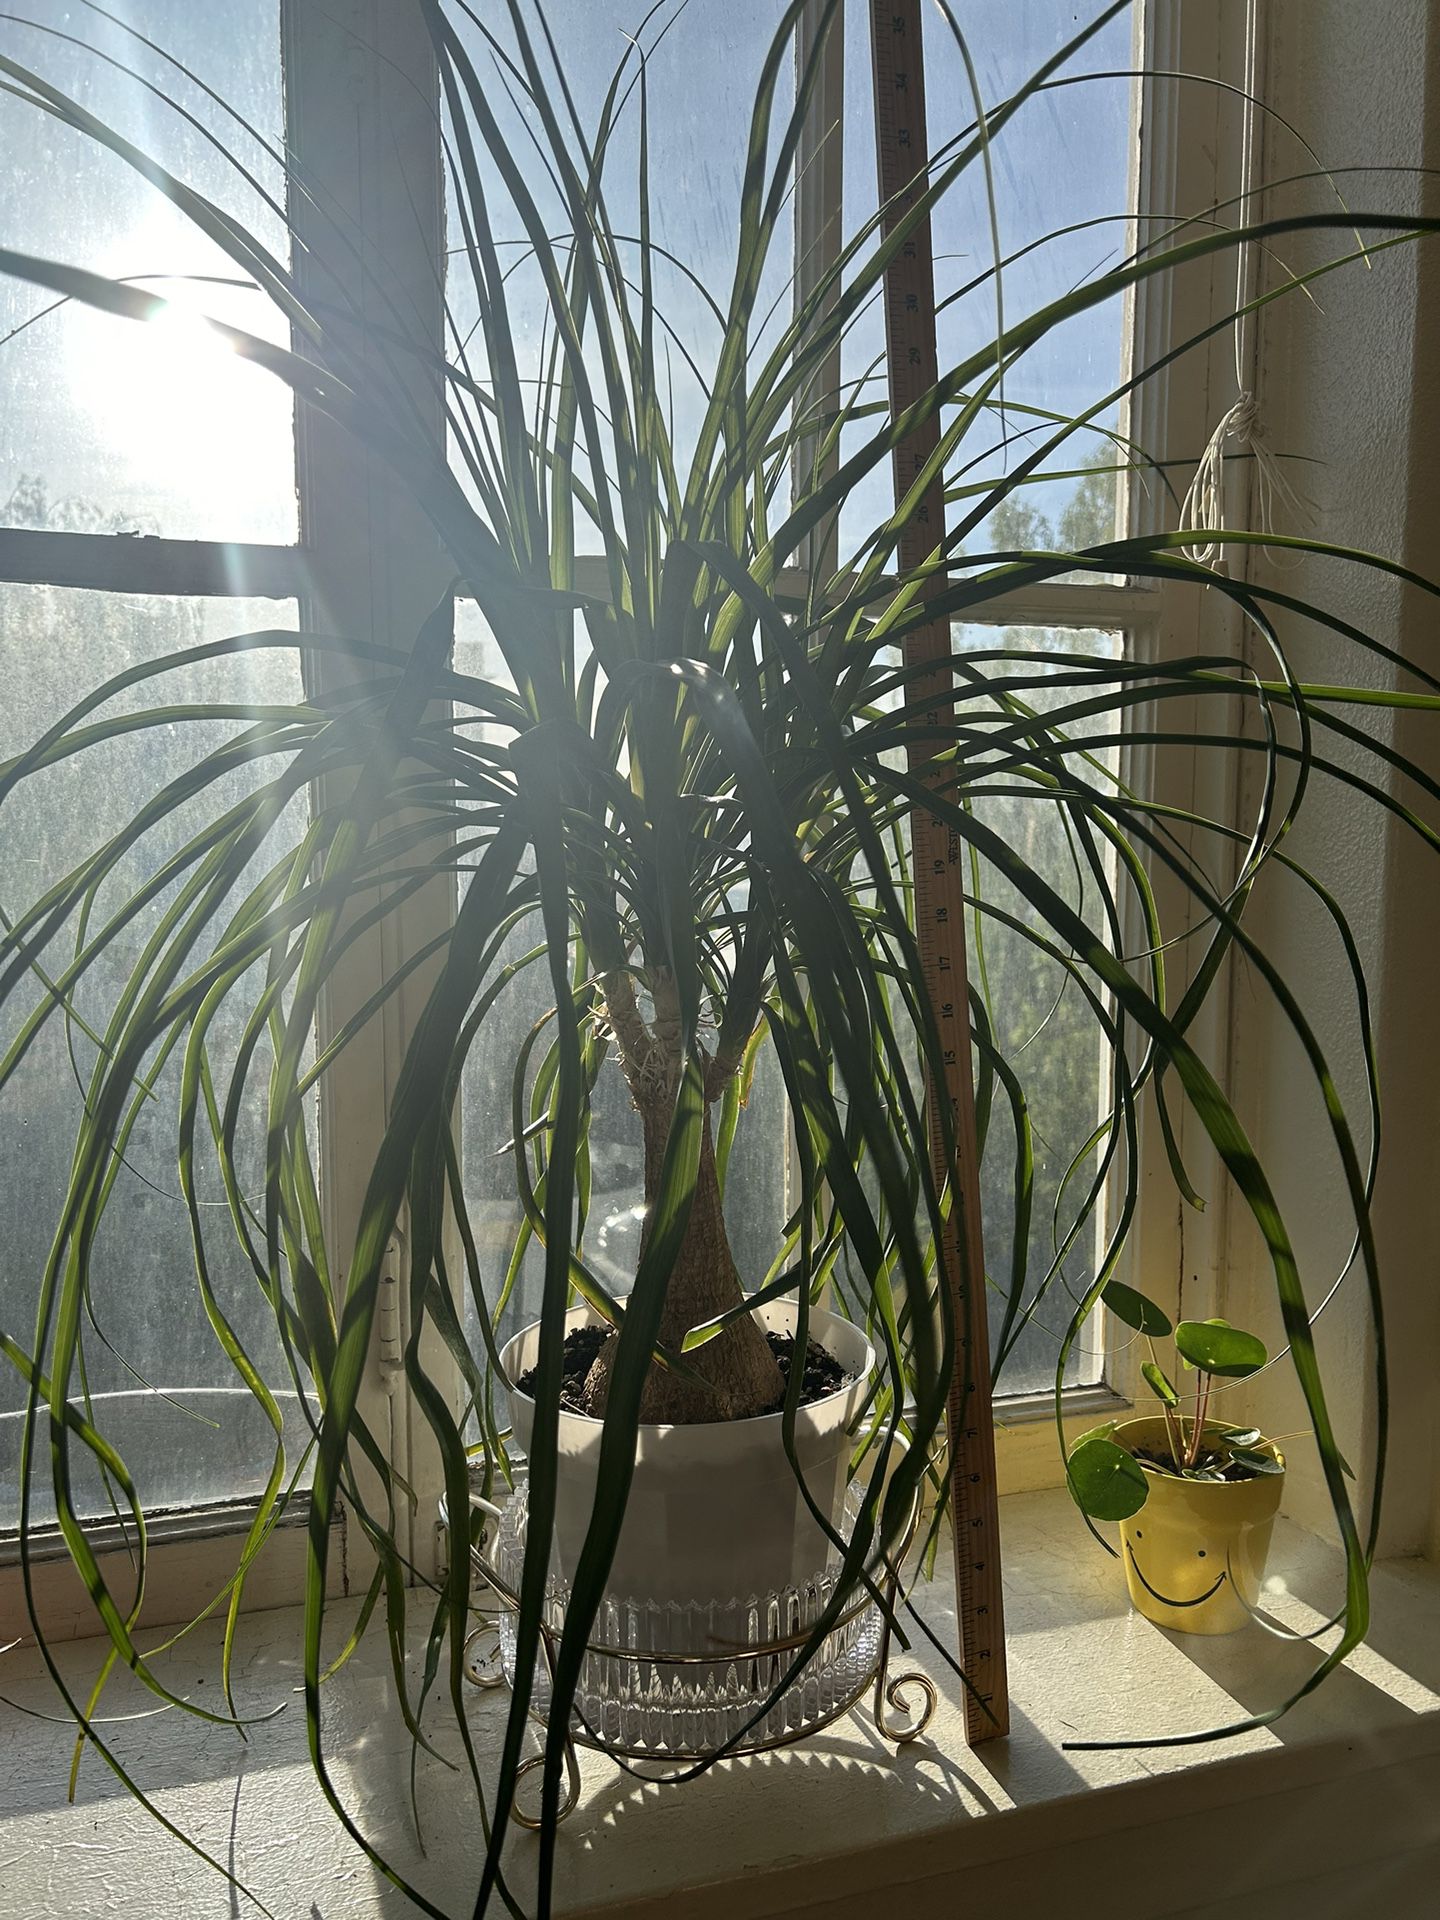 3 Foot Ponytail Palm